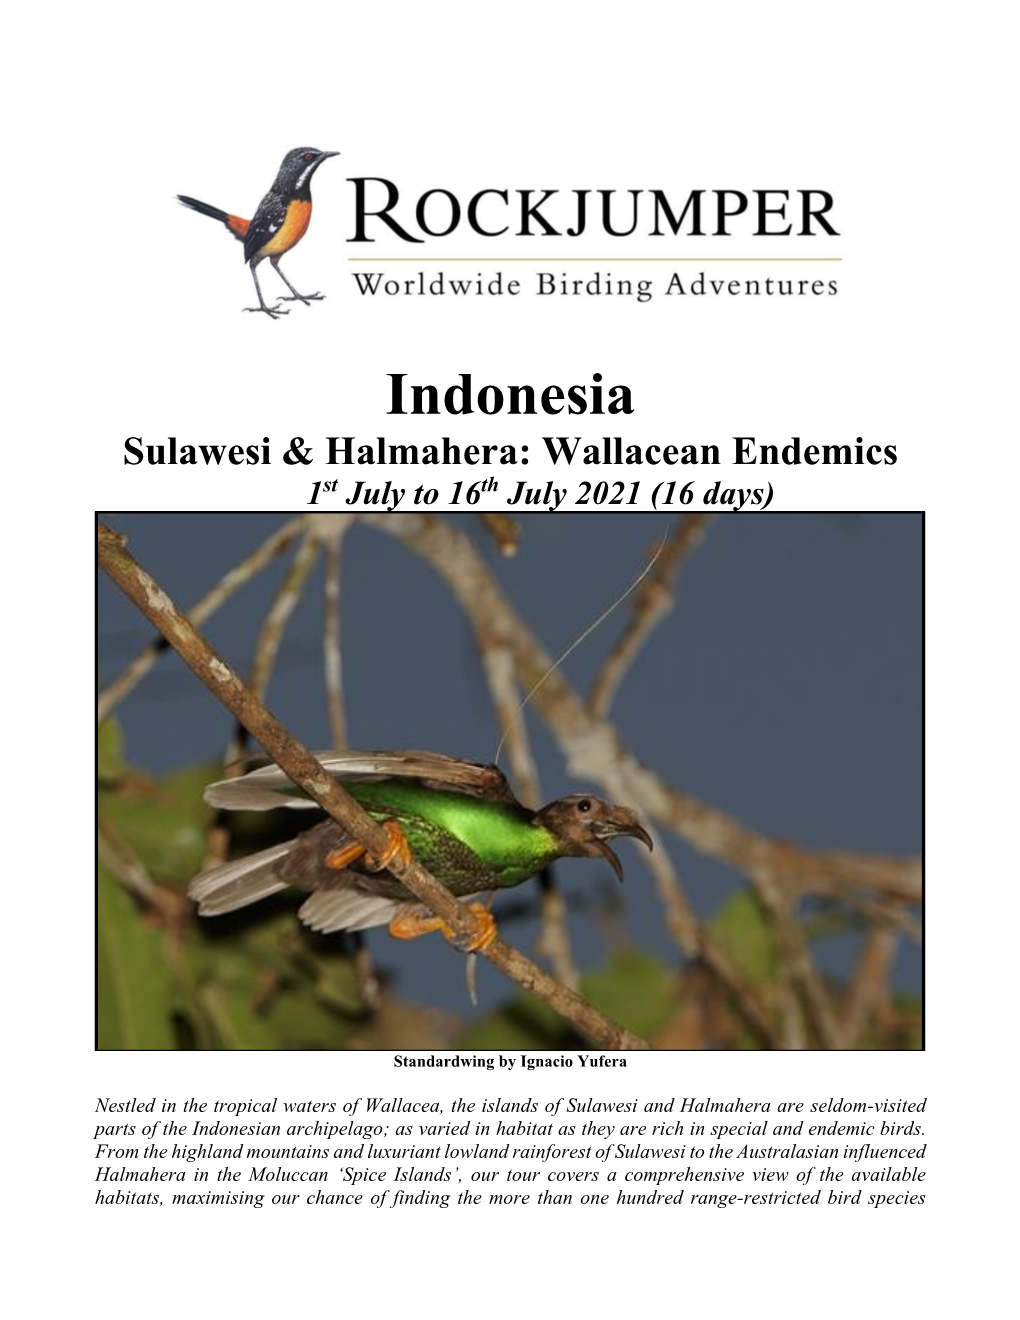 Indonesia Sulawesi & Halmahera: Wallacean Endemics 1St July to 16Th July 2021 (16 Days)